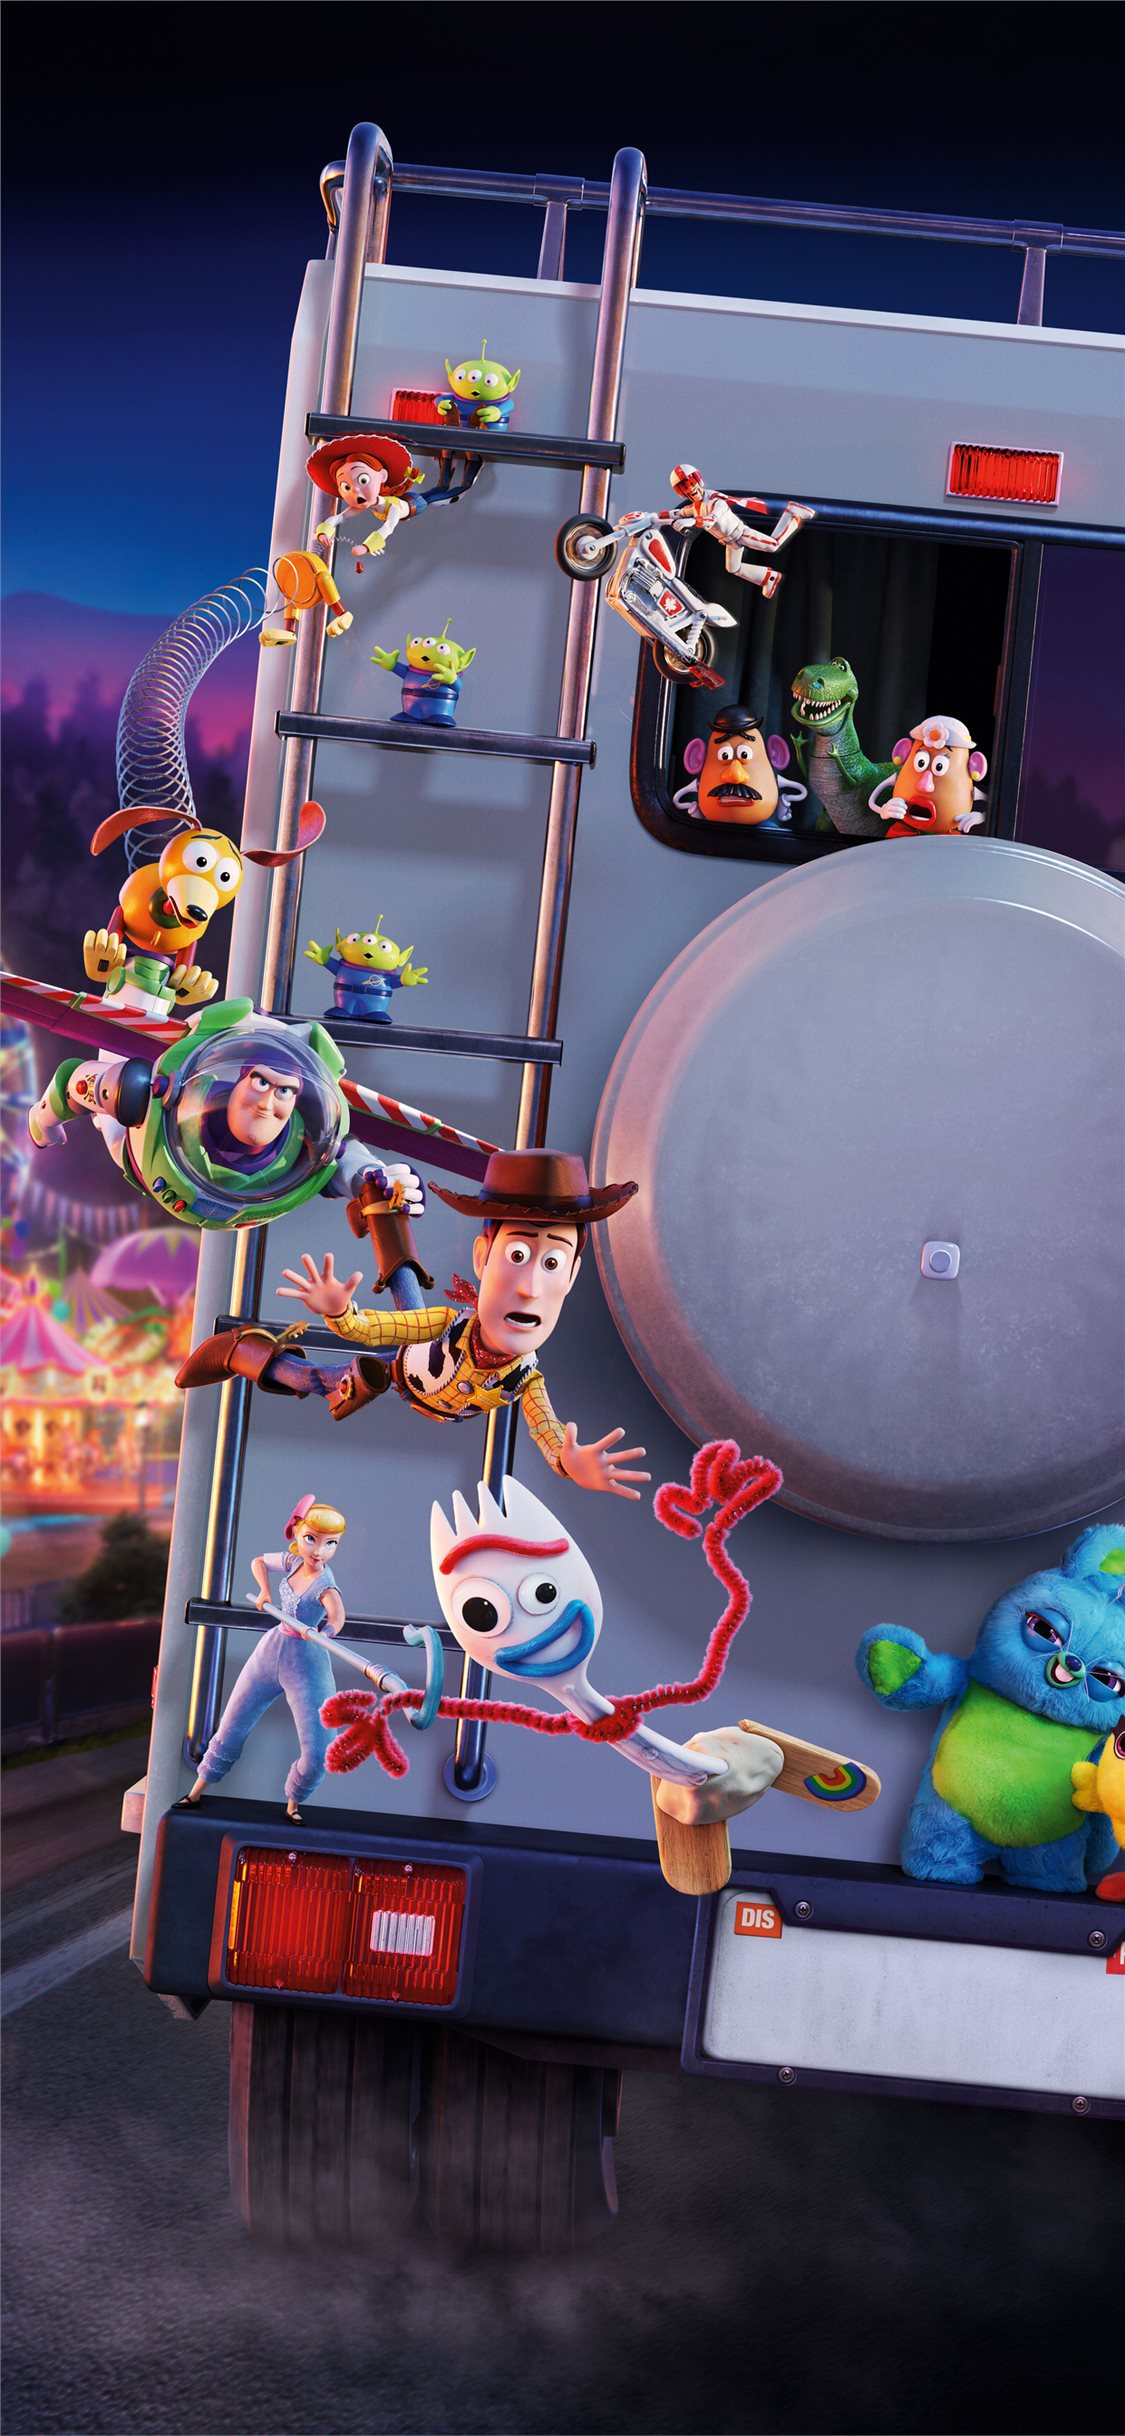 Free Download Toy Story 4 5k Iphone X Wallpapers Free Download